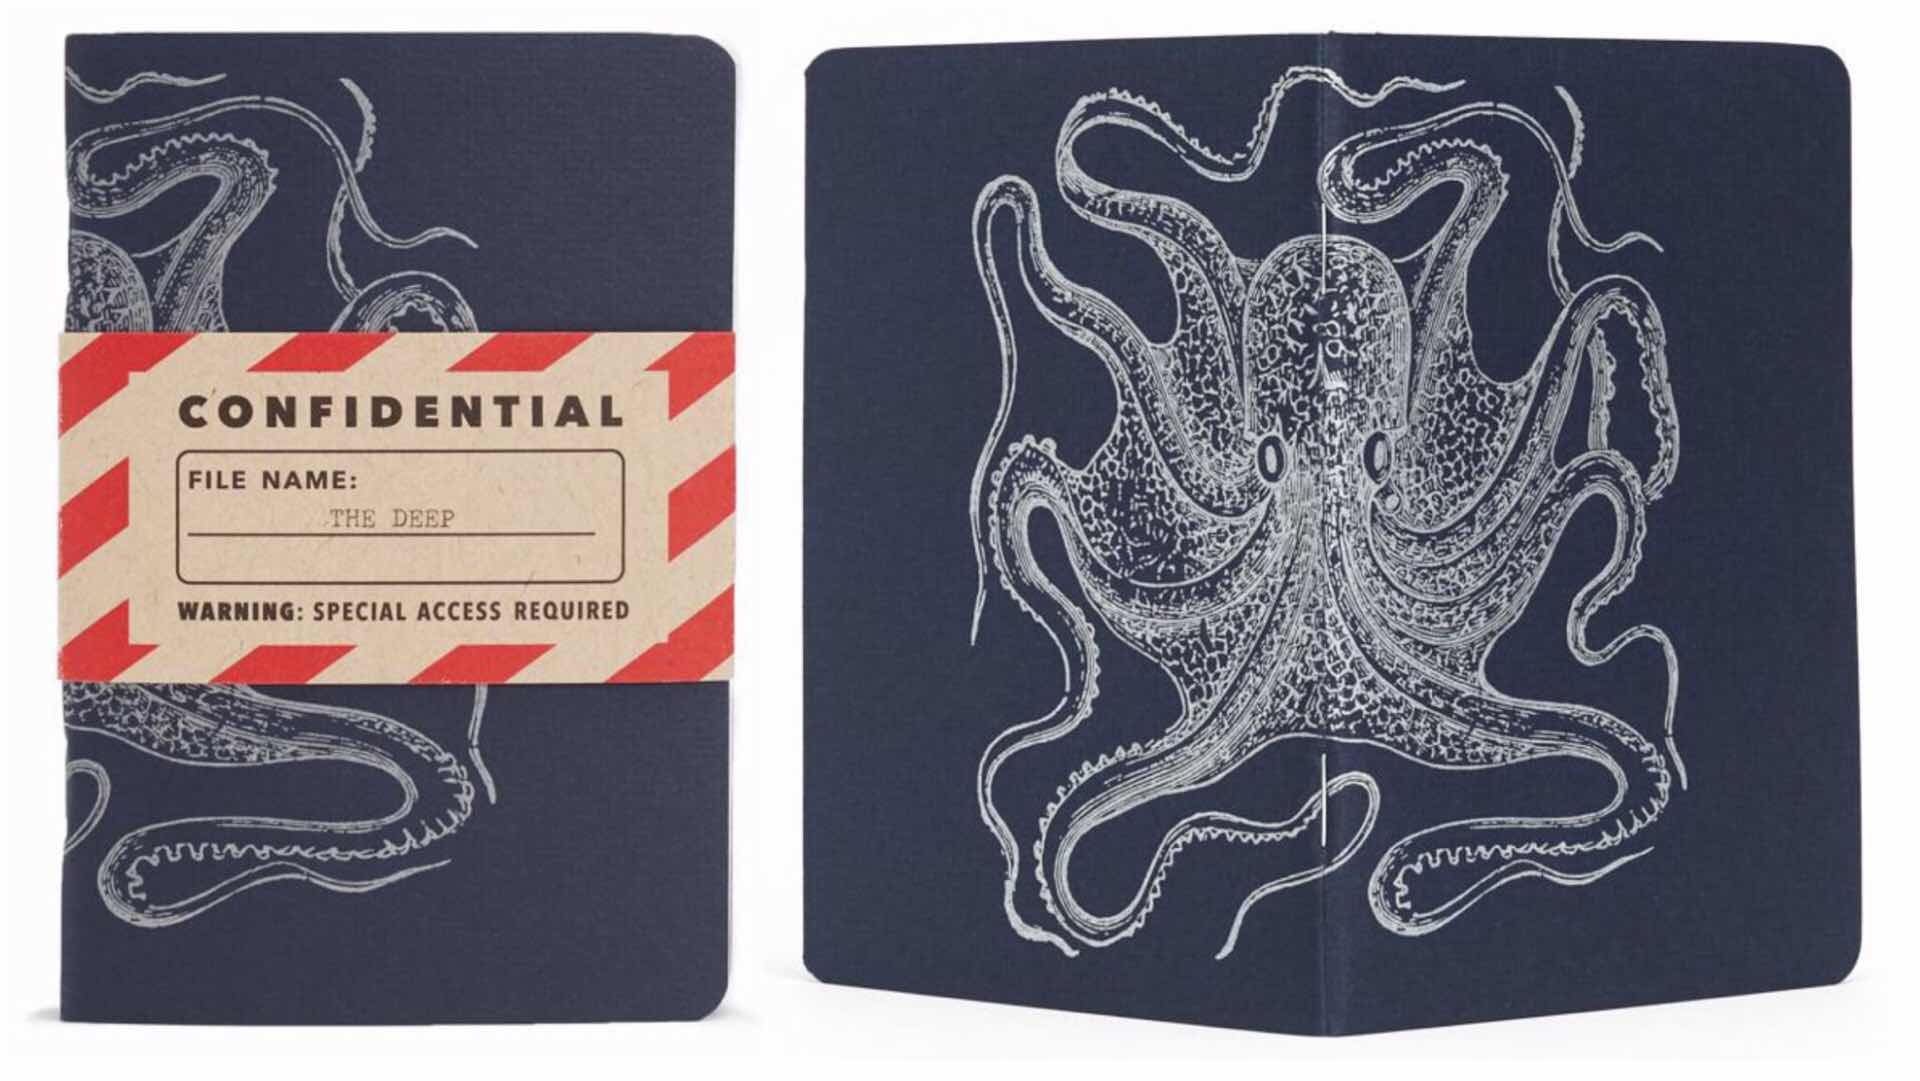 the-deep-limited-edition-pocket-notebook-by-write-notepad-and-co